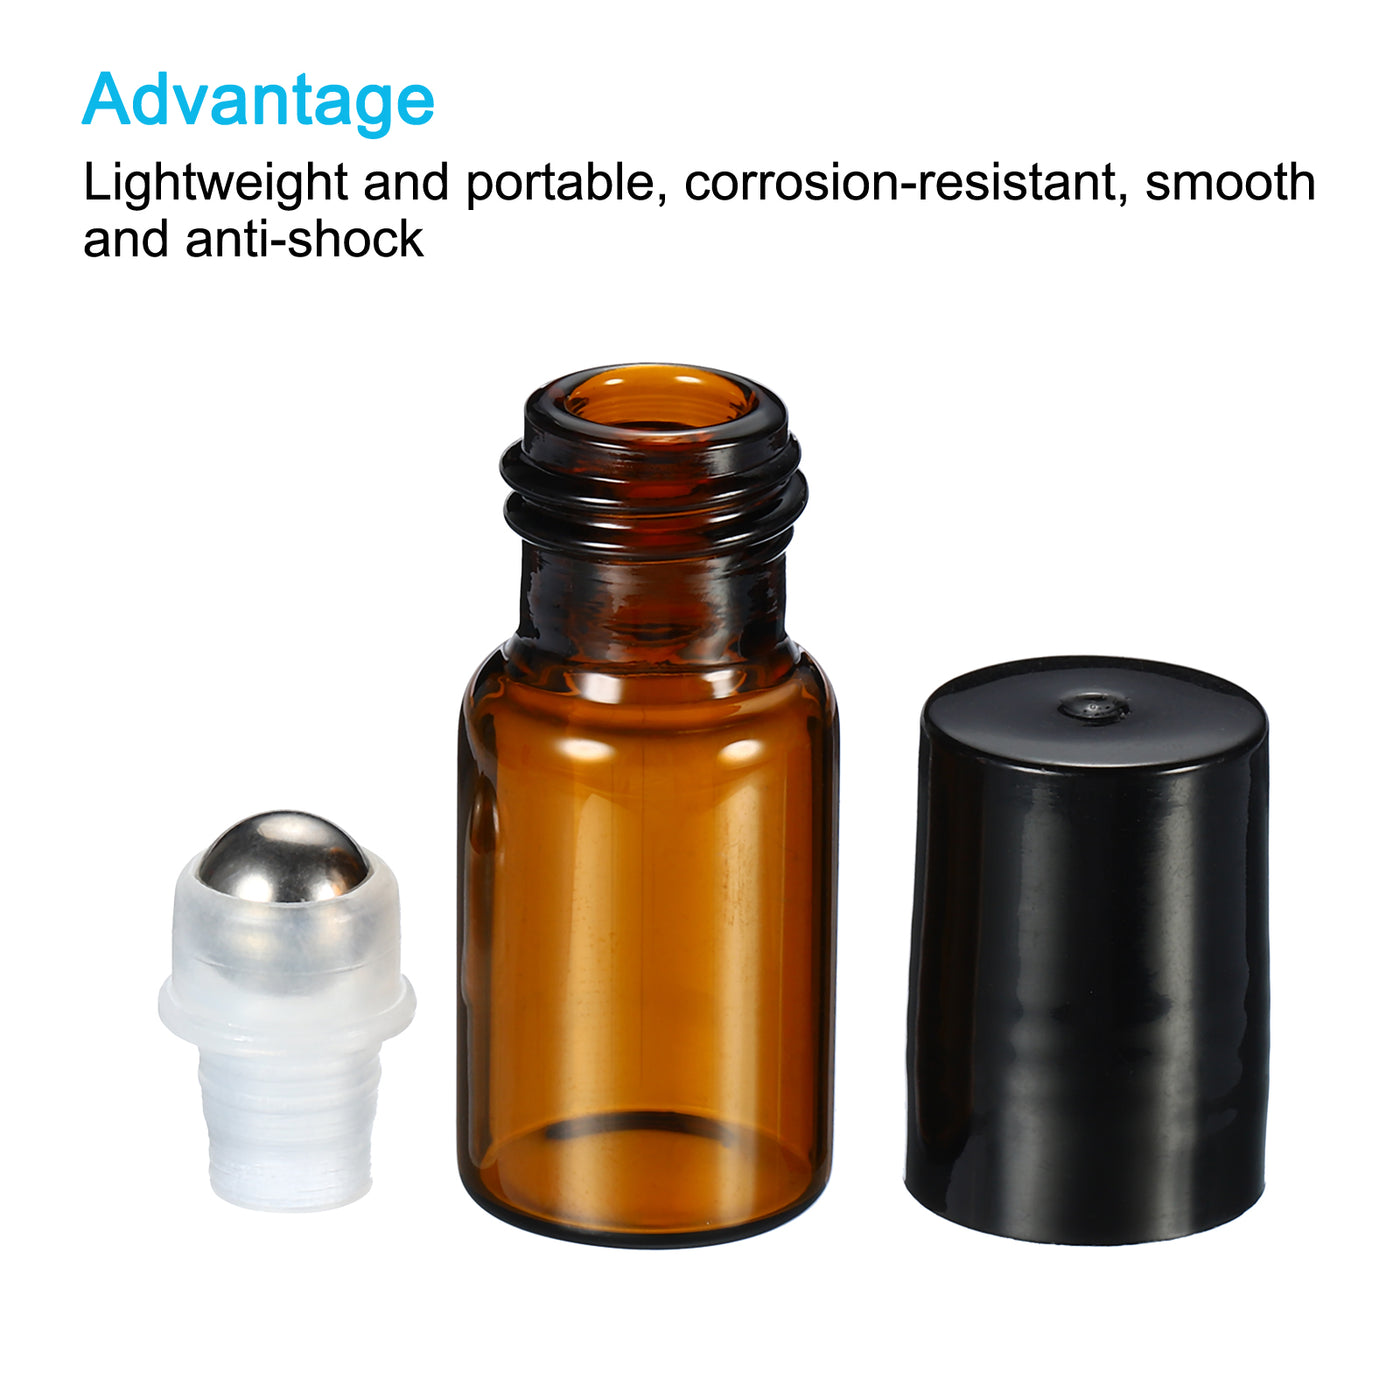 Harfington 3mL Roller Bottles, 6 Pack Amber Glass Essential Oil Roller Ball Black Caps Refillable Sample Containers, Brown